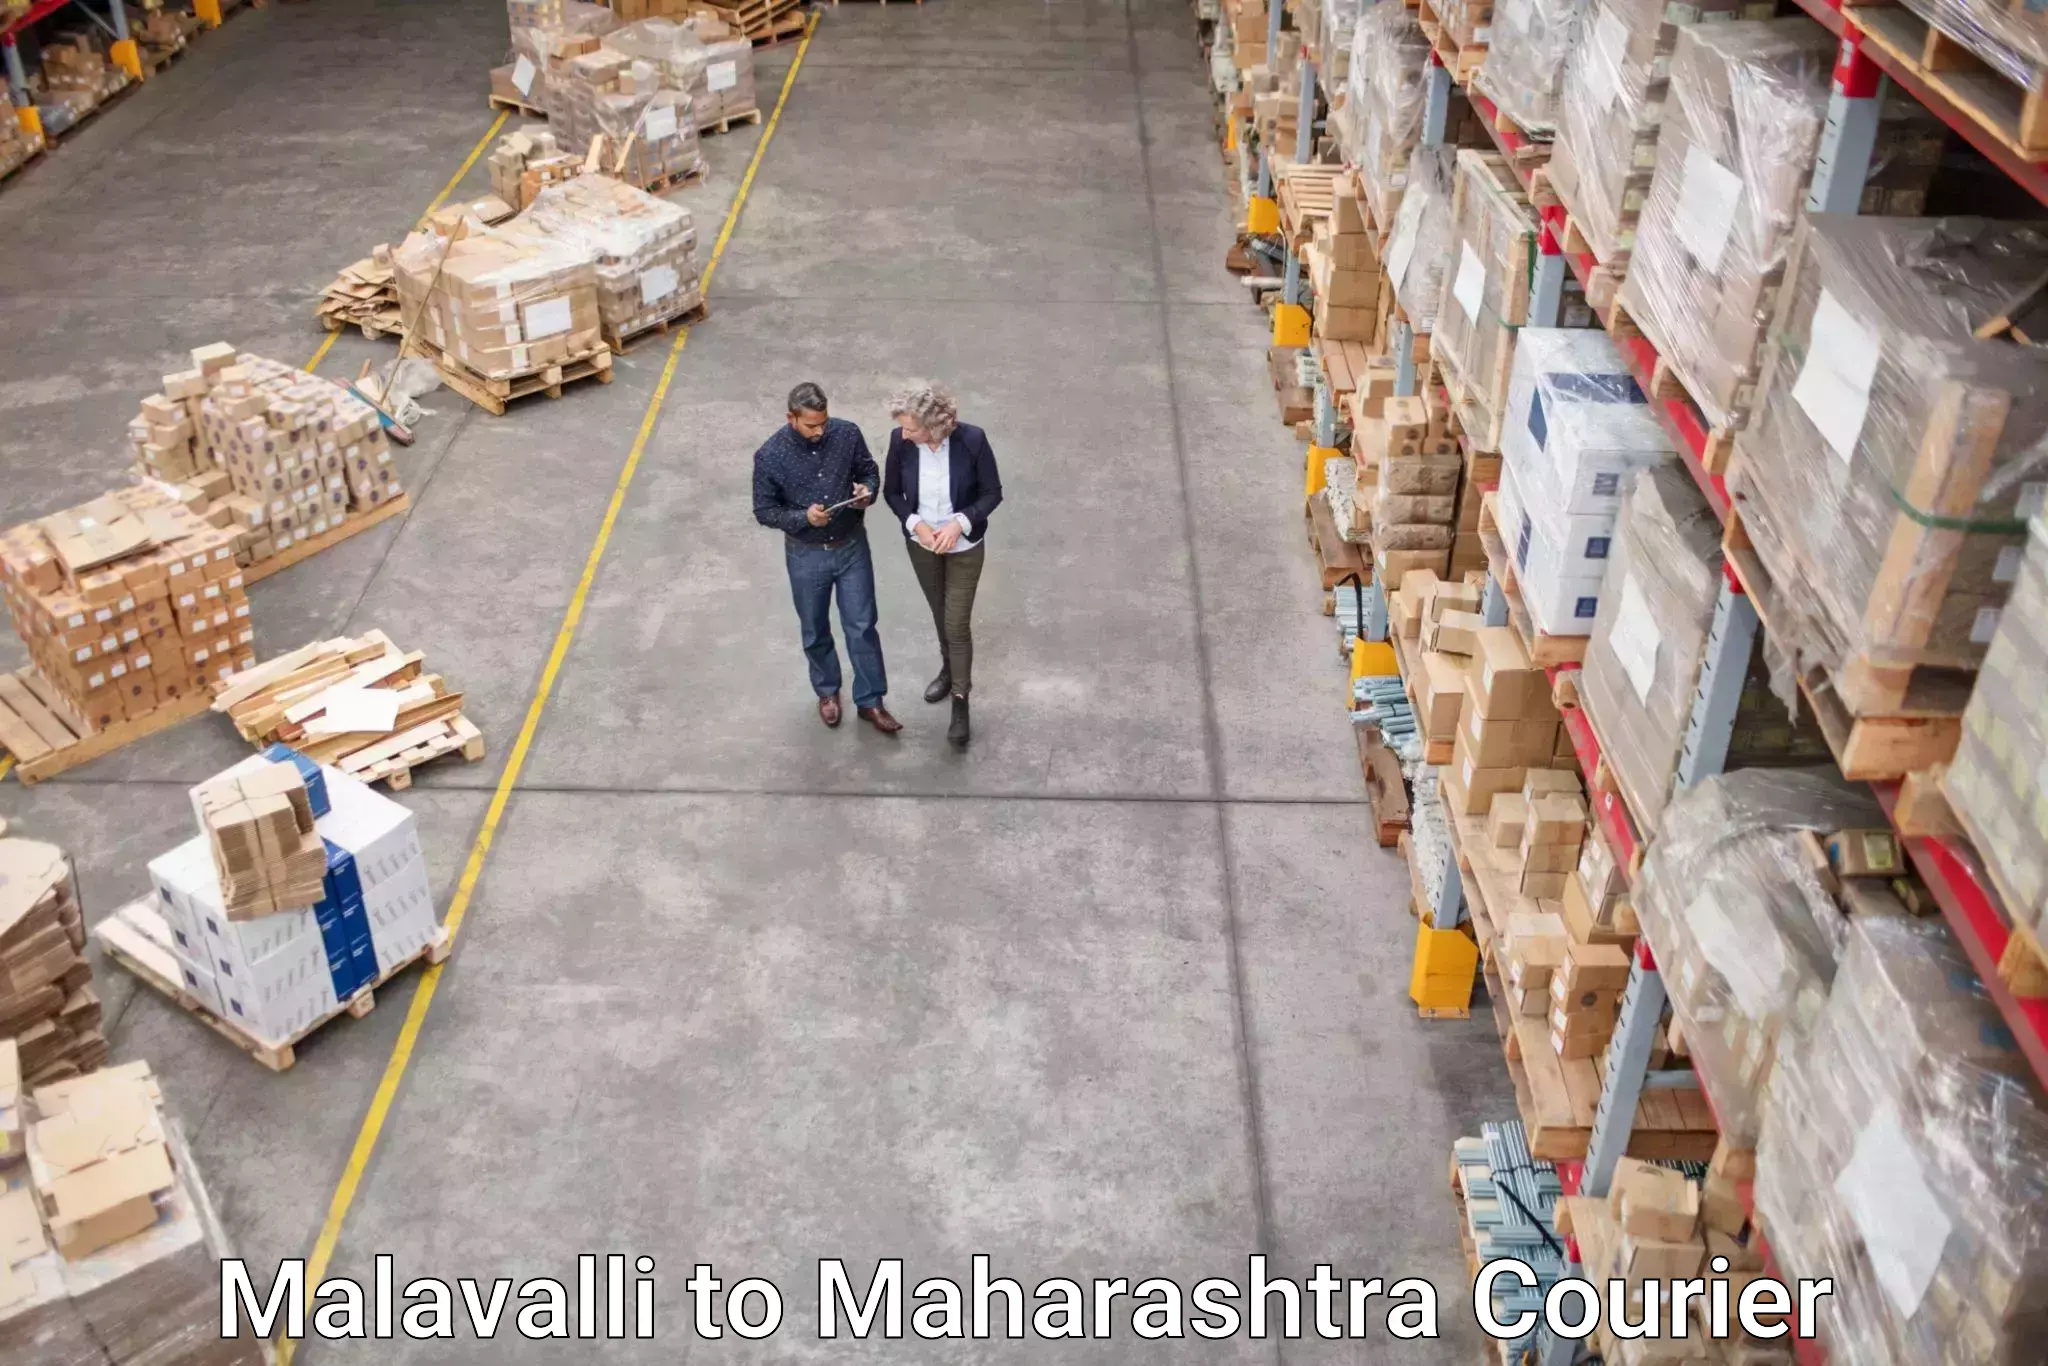 Sustainable courier practices Malavalli to Ahmednagar